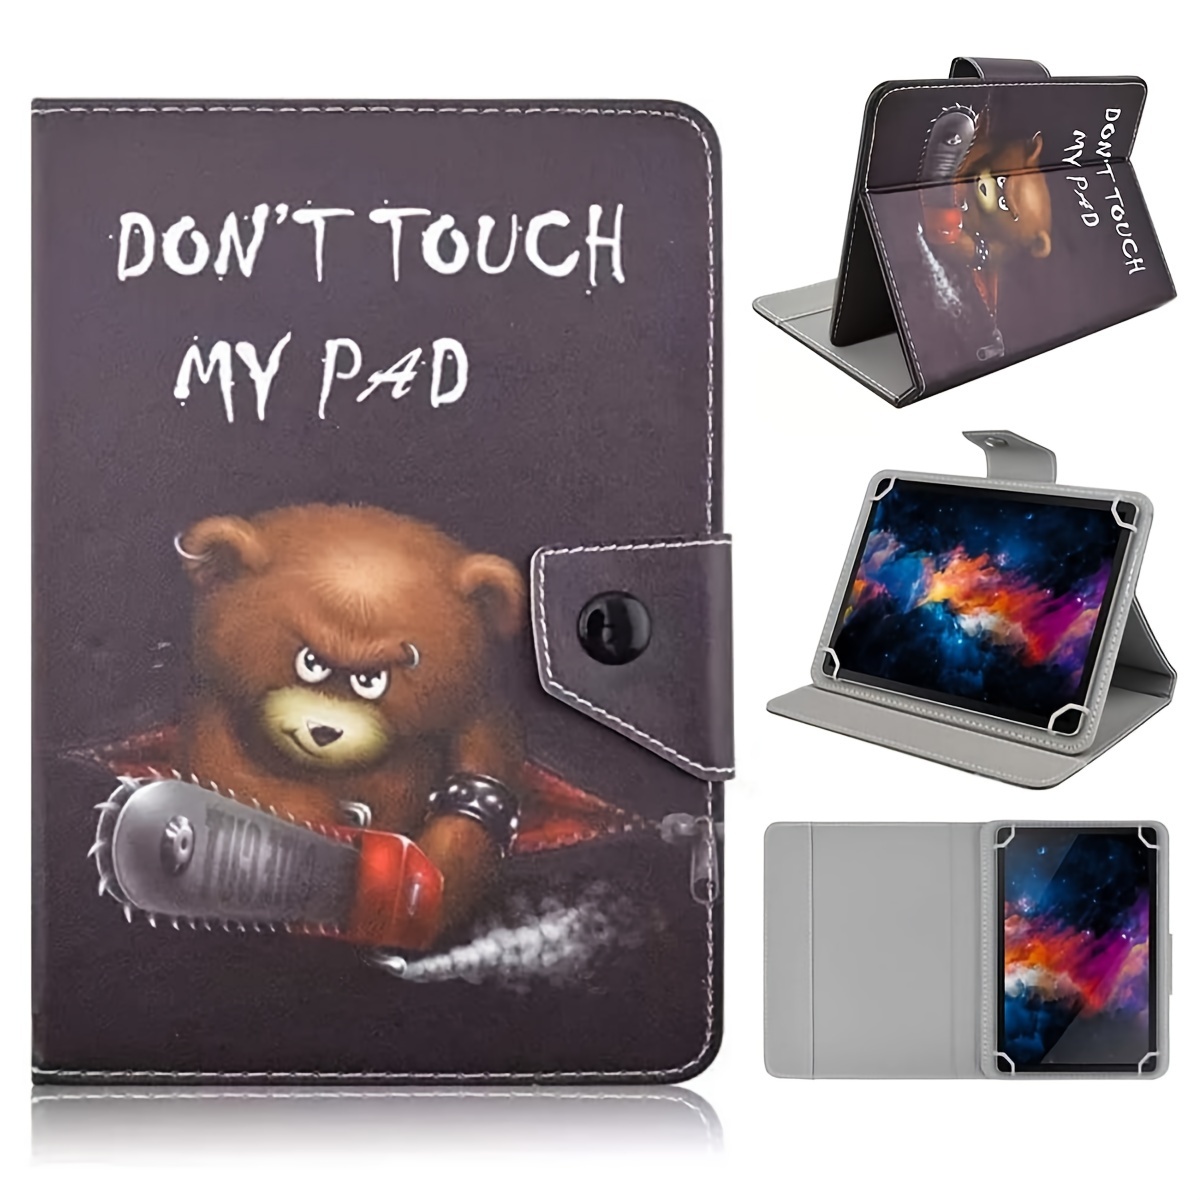 Touch Screen Portable Notebook 8.4 Inch  Mini laptop, Girly phone cases,  Notebook laptop